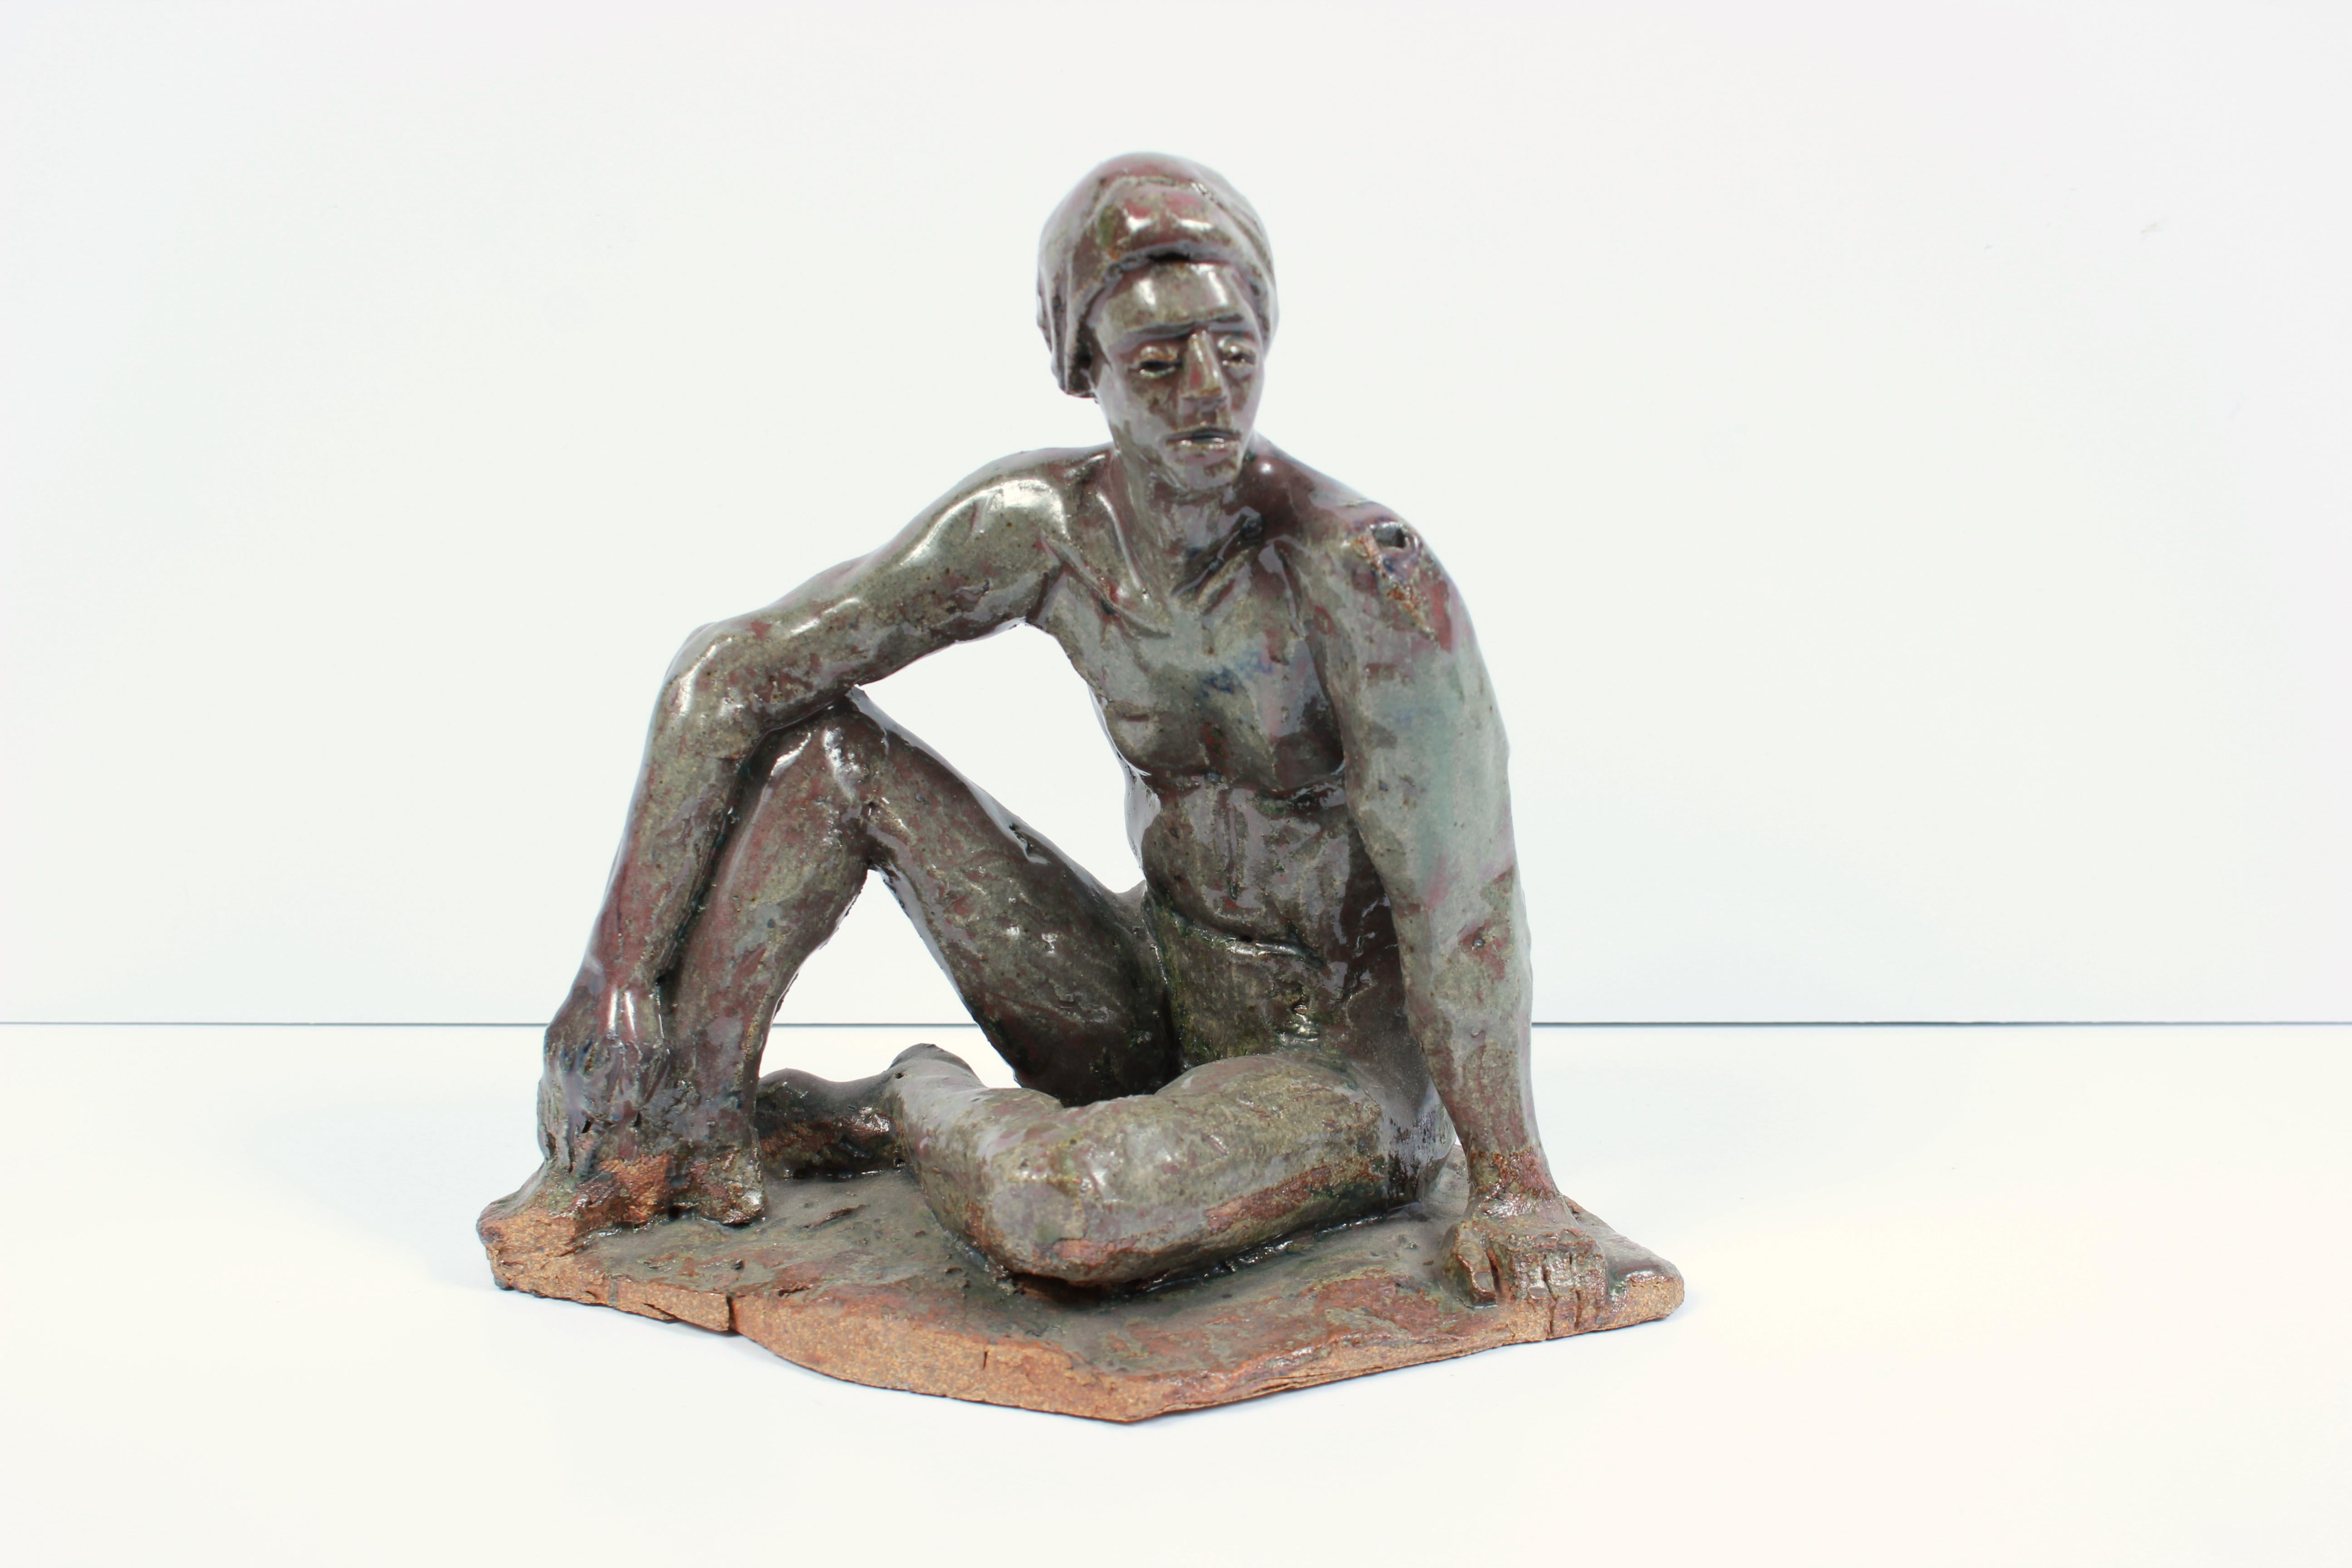 Dave Fox Nude Sculpture - Seated Male Figure Ceramic Sculpture with Turquoise, Gray and Brown